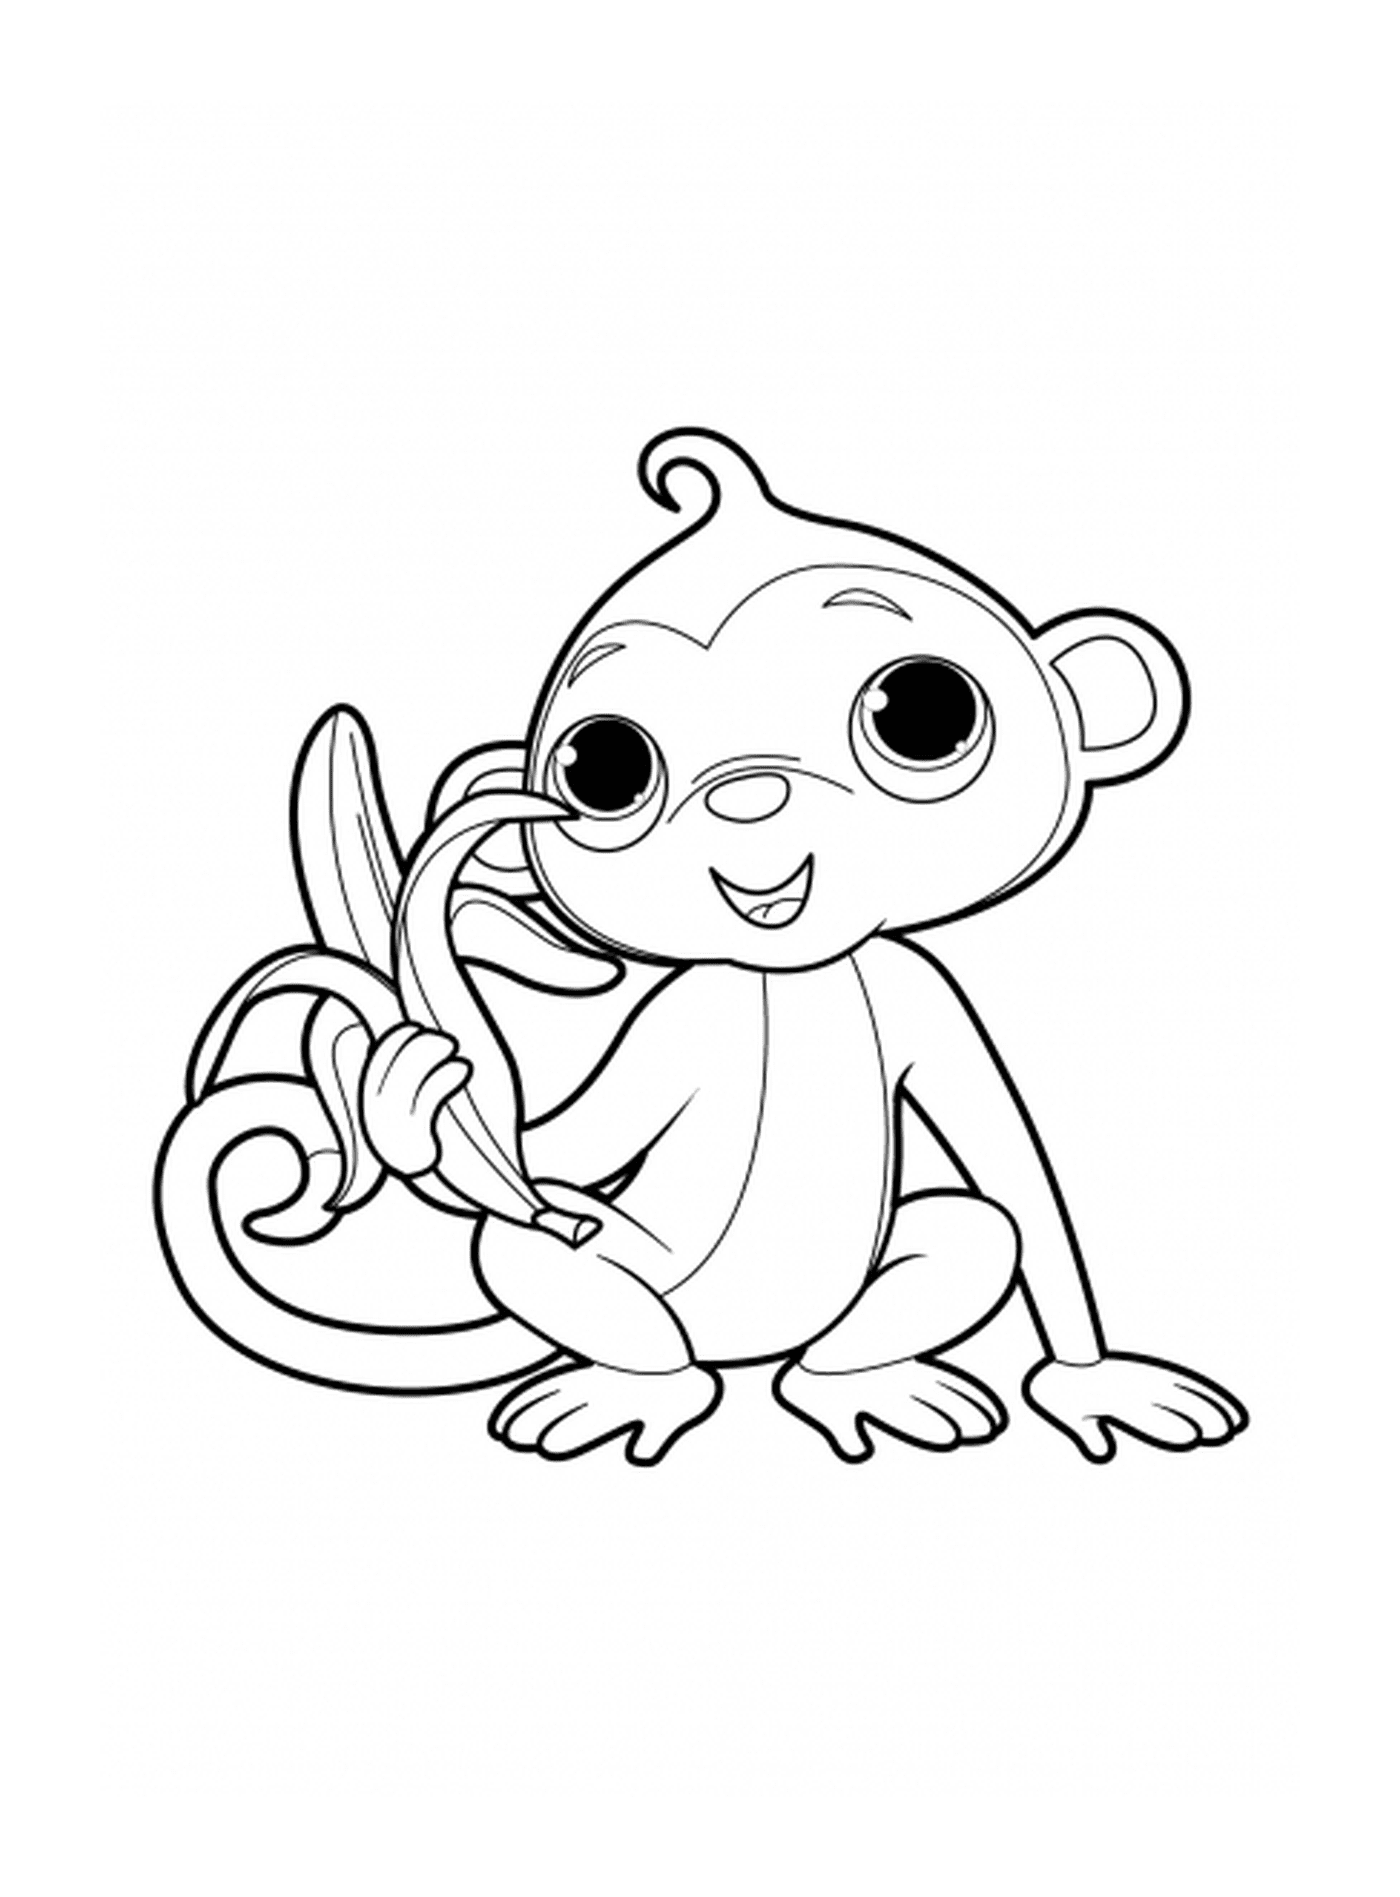  Monkey with a delicious banana 